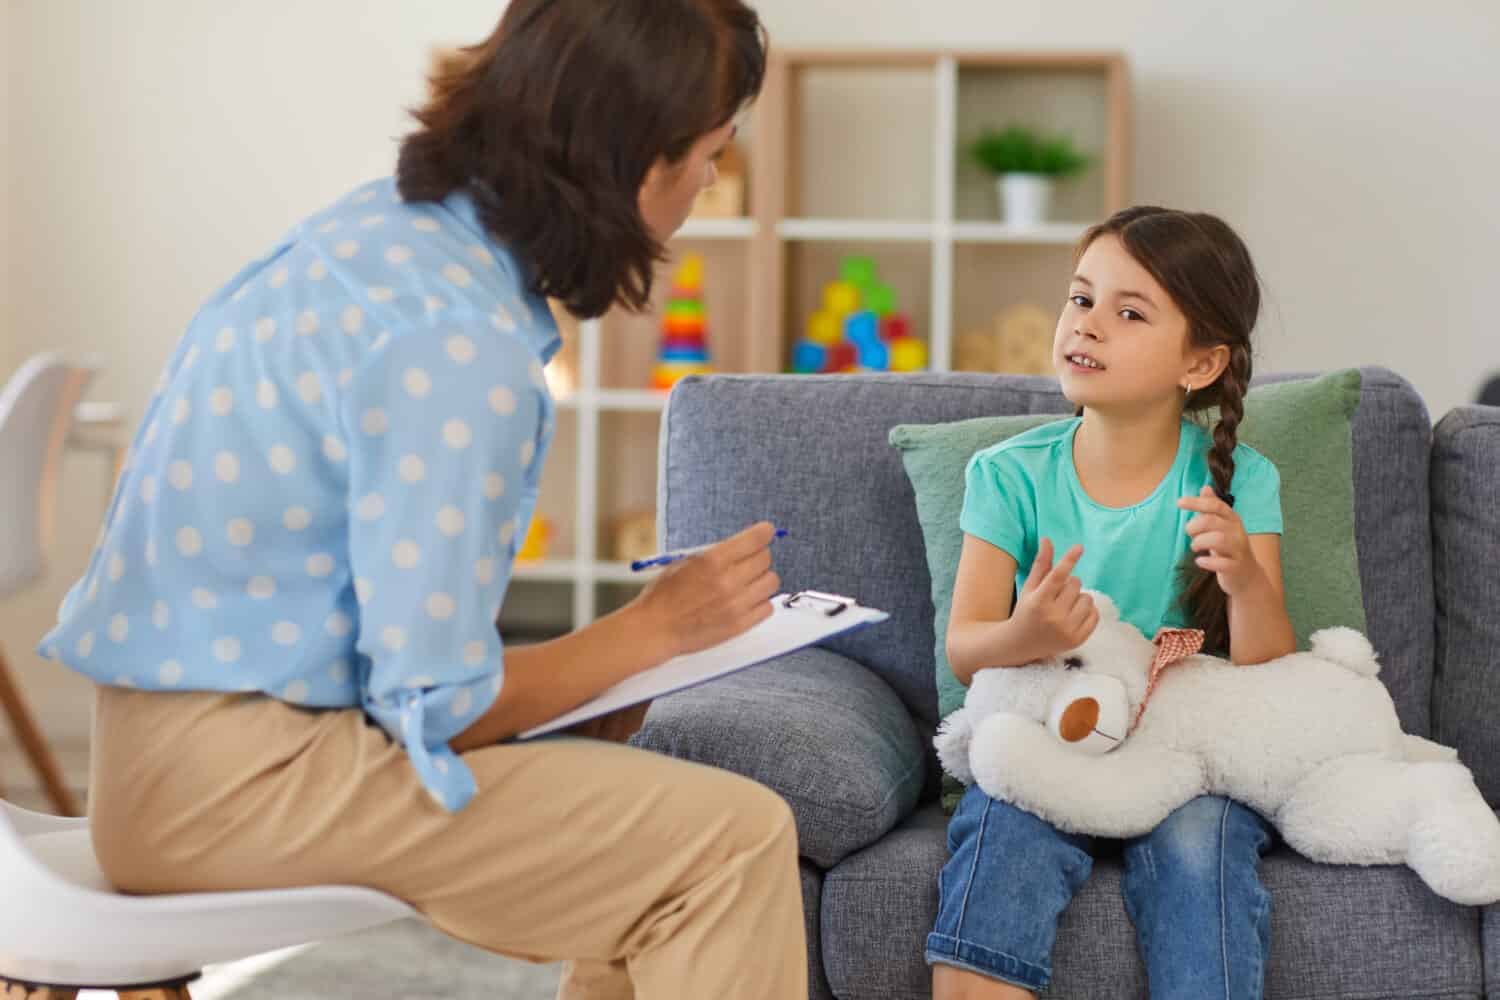 Supportive psychologist with clipboard listening to little child during therapy session. Preschool girl feeling at ease in therapist's office sharing her thoughts and concerns